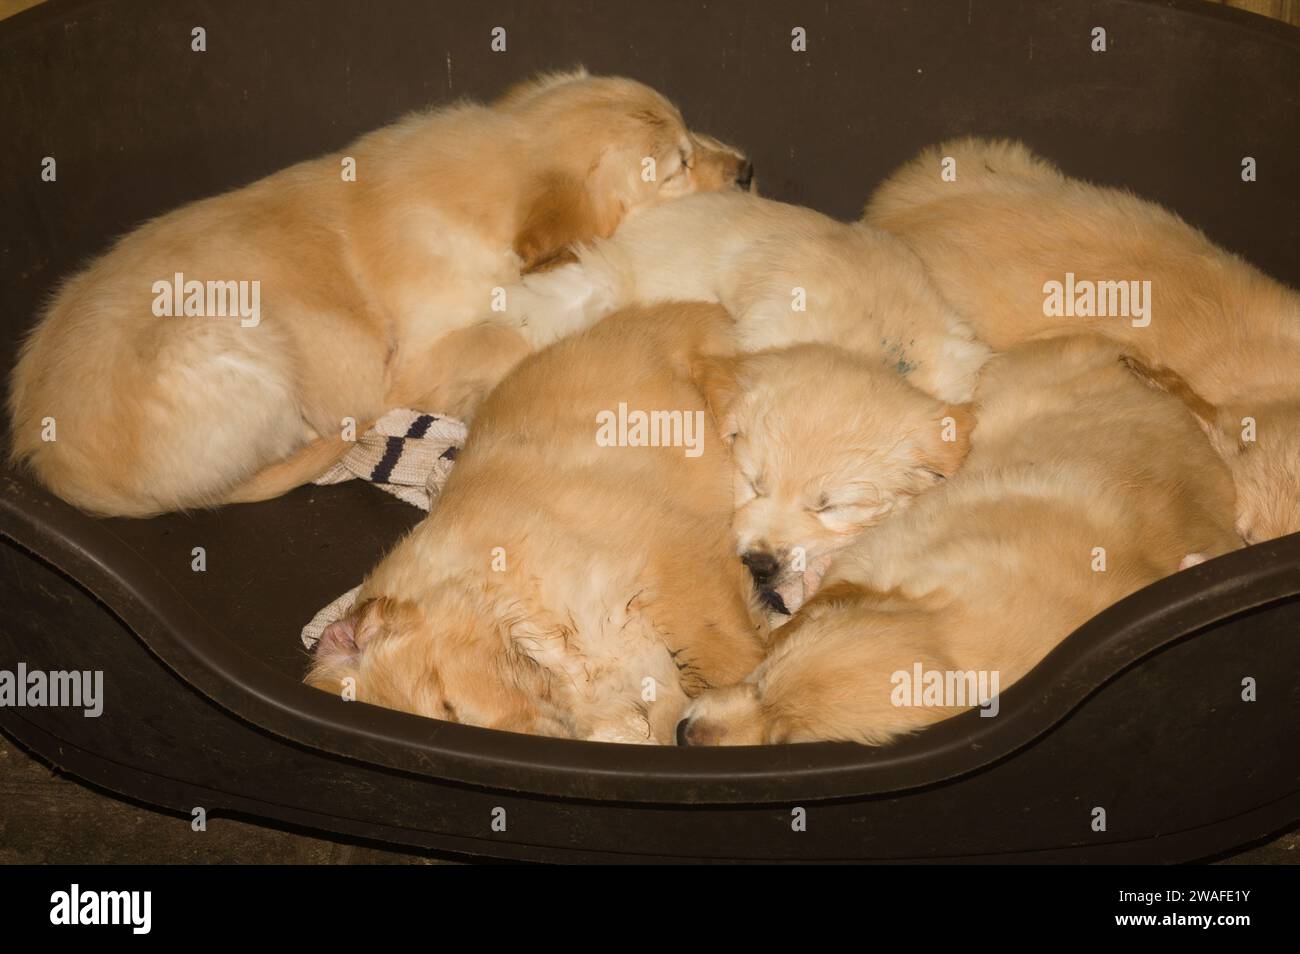 Five young golden retrievers sleep contentedly in a dog basket digesting their latest meal Stock Photo